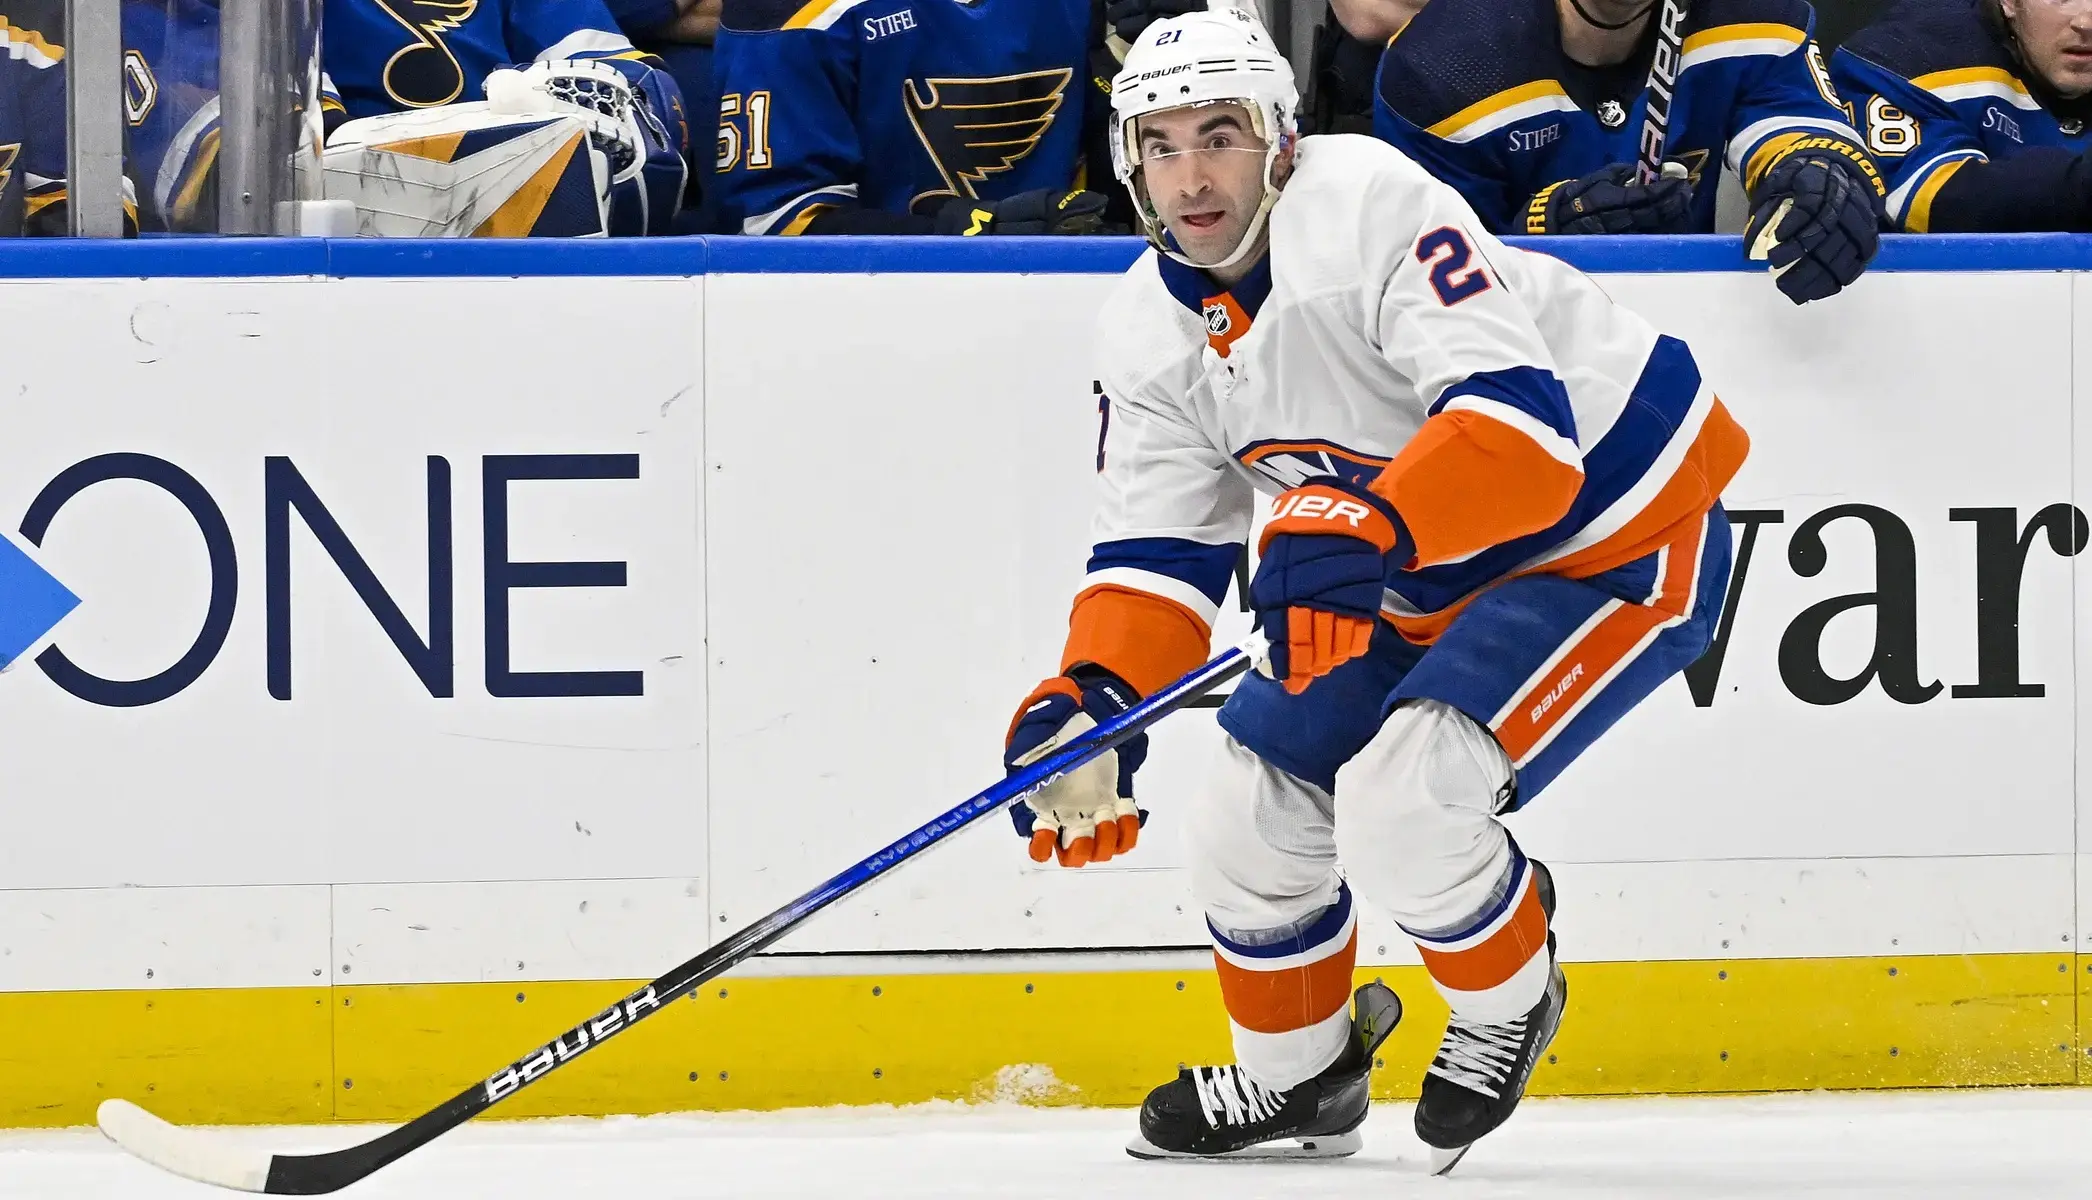 New York Islanders center Kyle Palmieri (21) controls the puck against the St. Louis Blues during the first period at Enterprise Center. / Jeff Curry-USA TODAY Sports